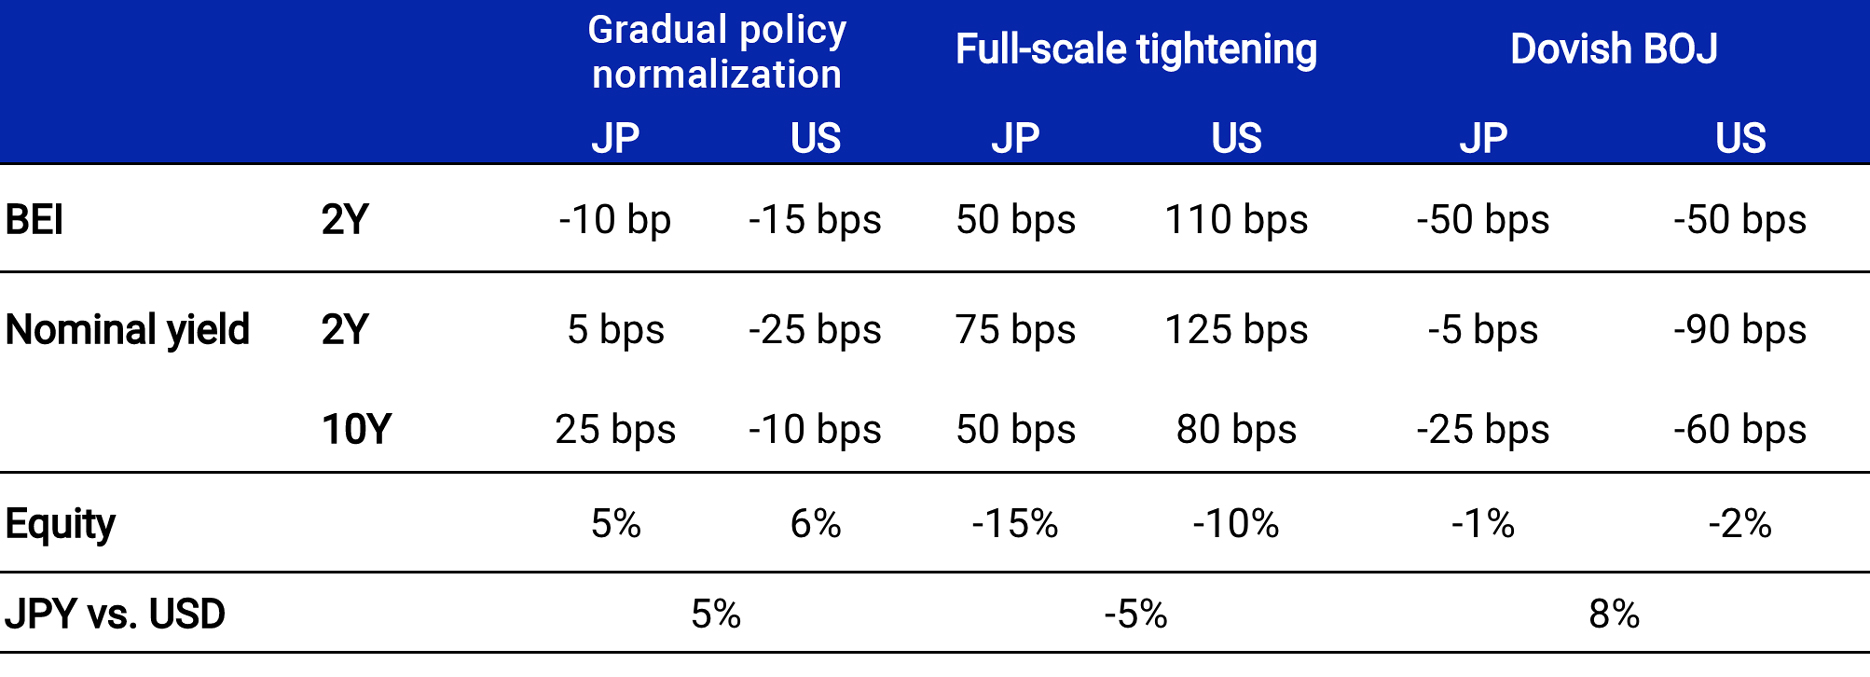 The exhibit is a table detailing the various assumptions that went into the three scenarios in the analysis. For the “full-scale tightening” scenario, we assume Japanese two-year breakeven inflation will rise by 50 basis points, nominal yields on two-year Japanese government bonds will rise by 75 basis points and Japanese equities will drop by 15%.